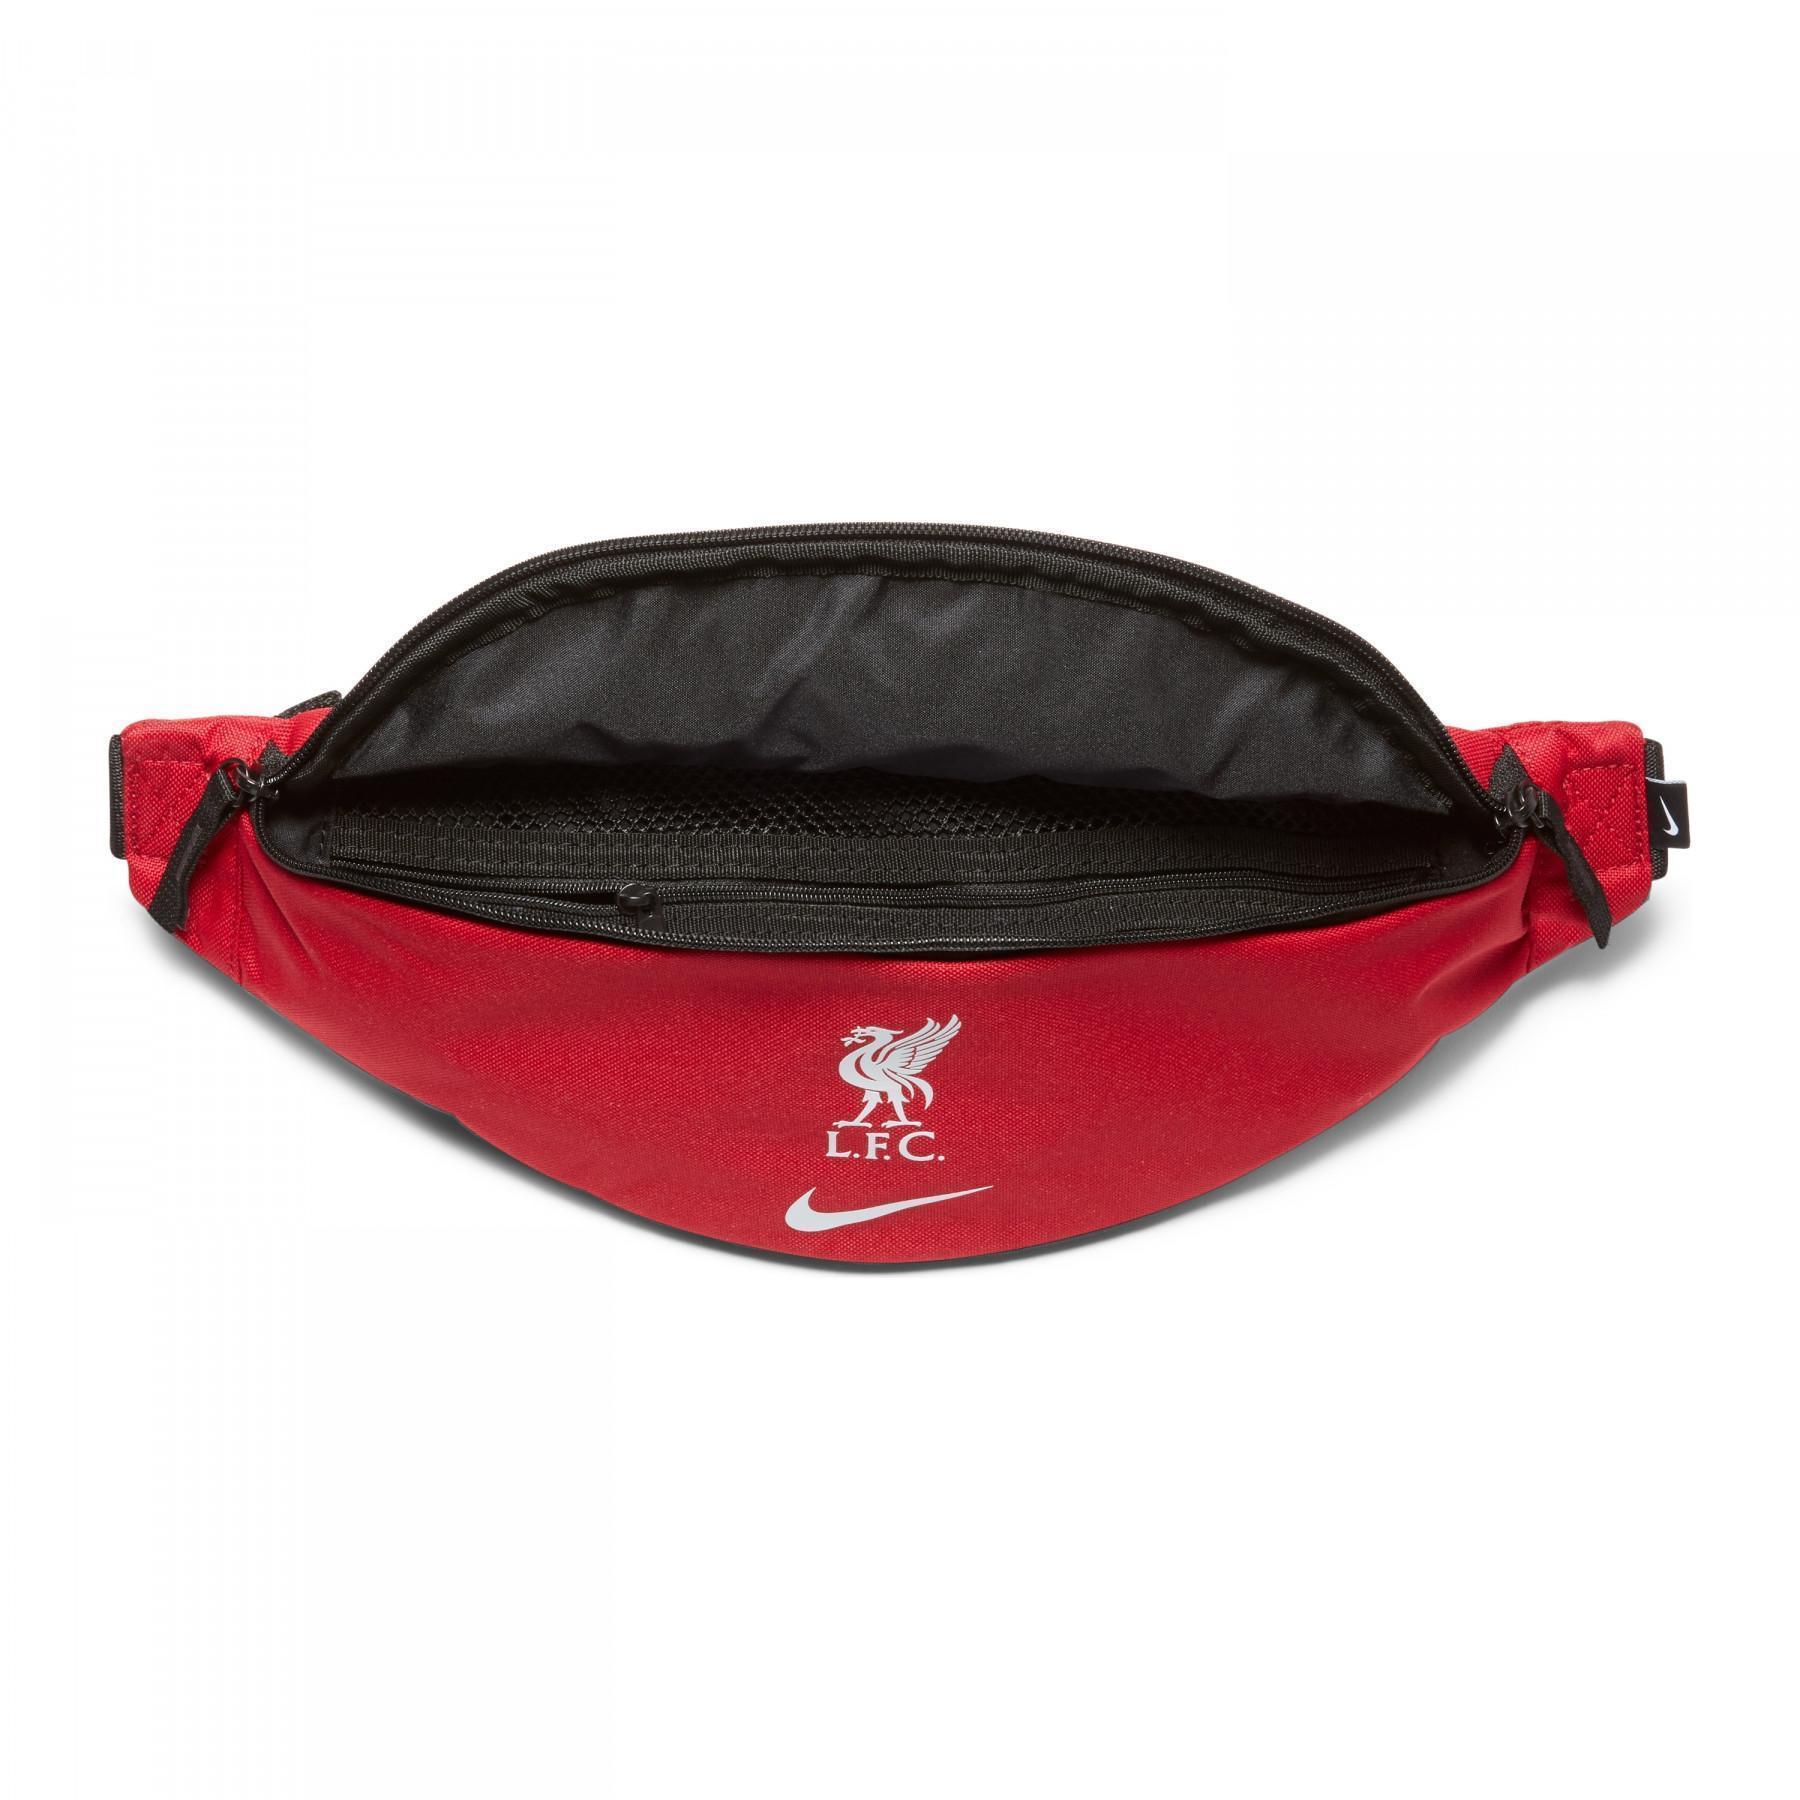 Fanny pack liverpool